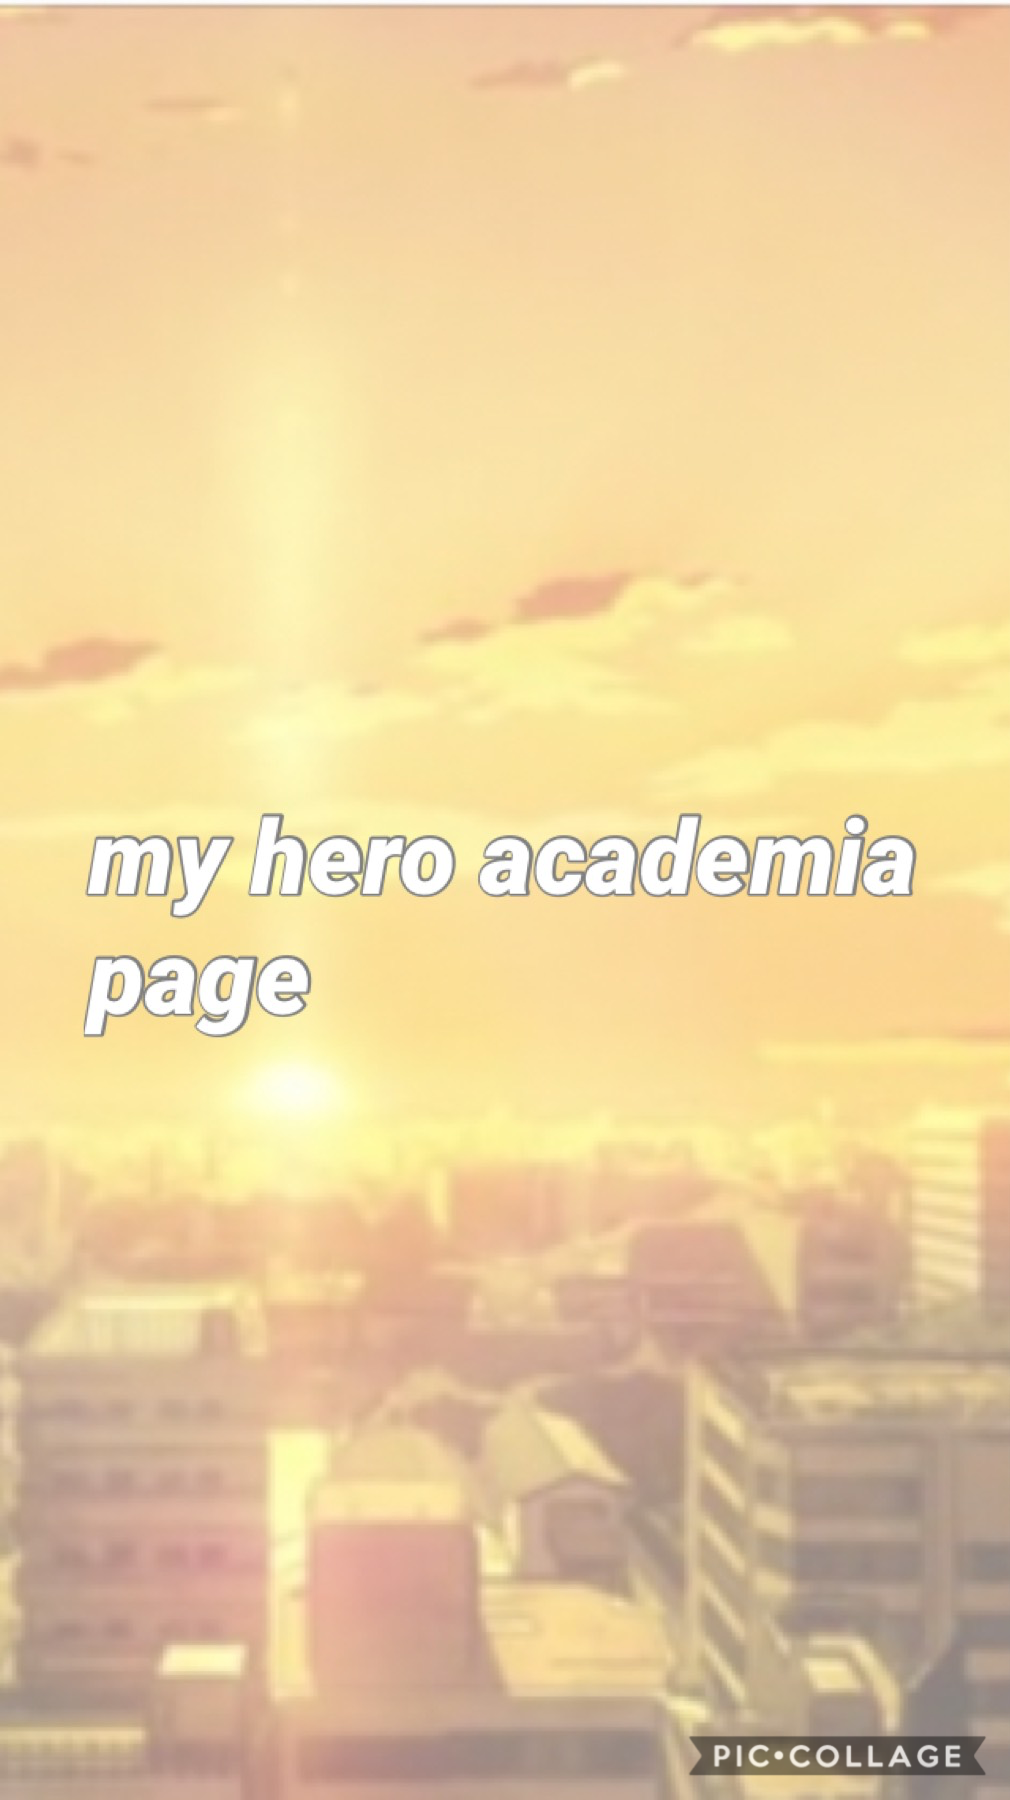 -reply- spoiler warning! feel free to chat about my hero academia here!